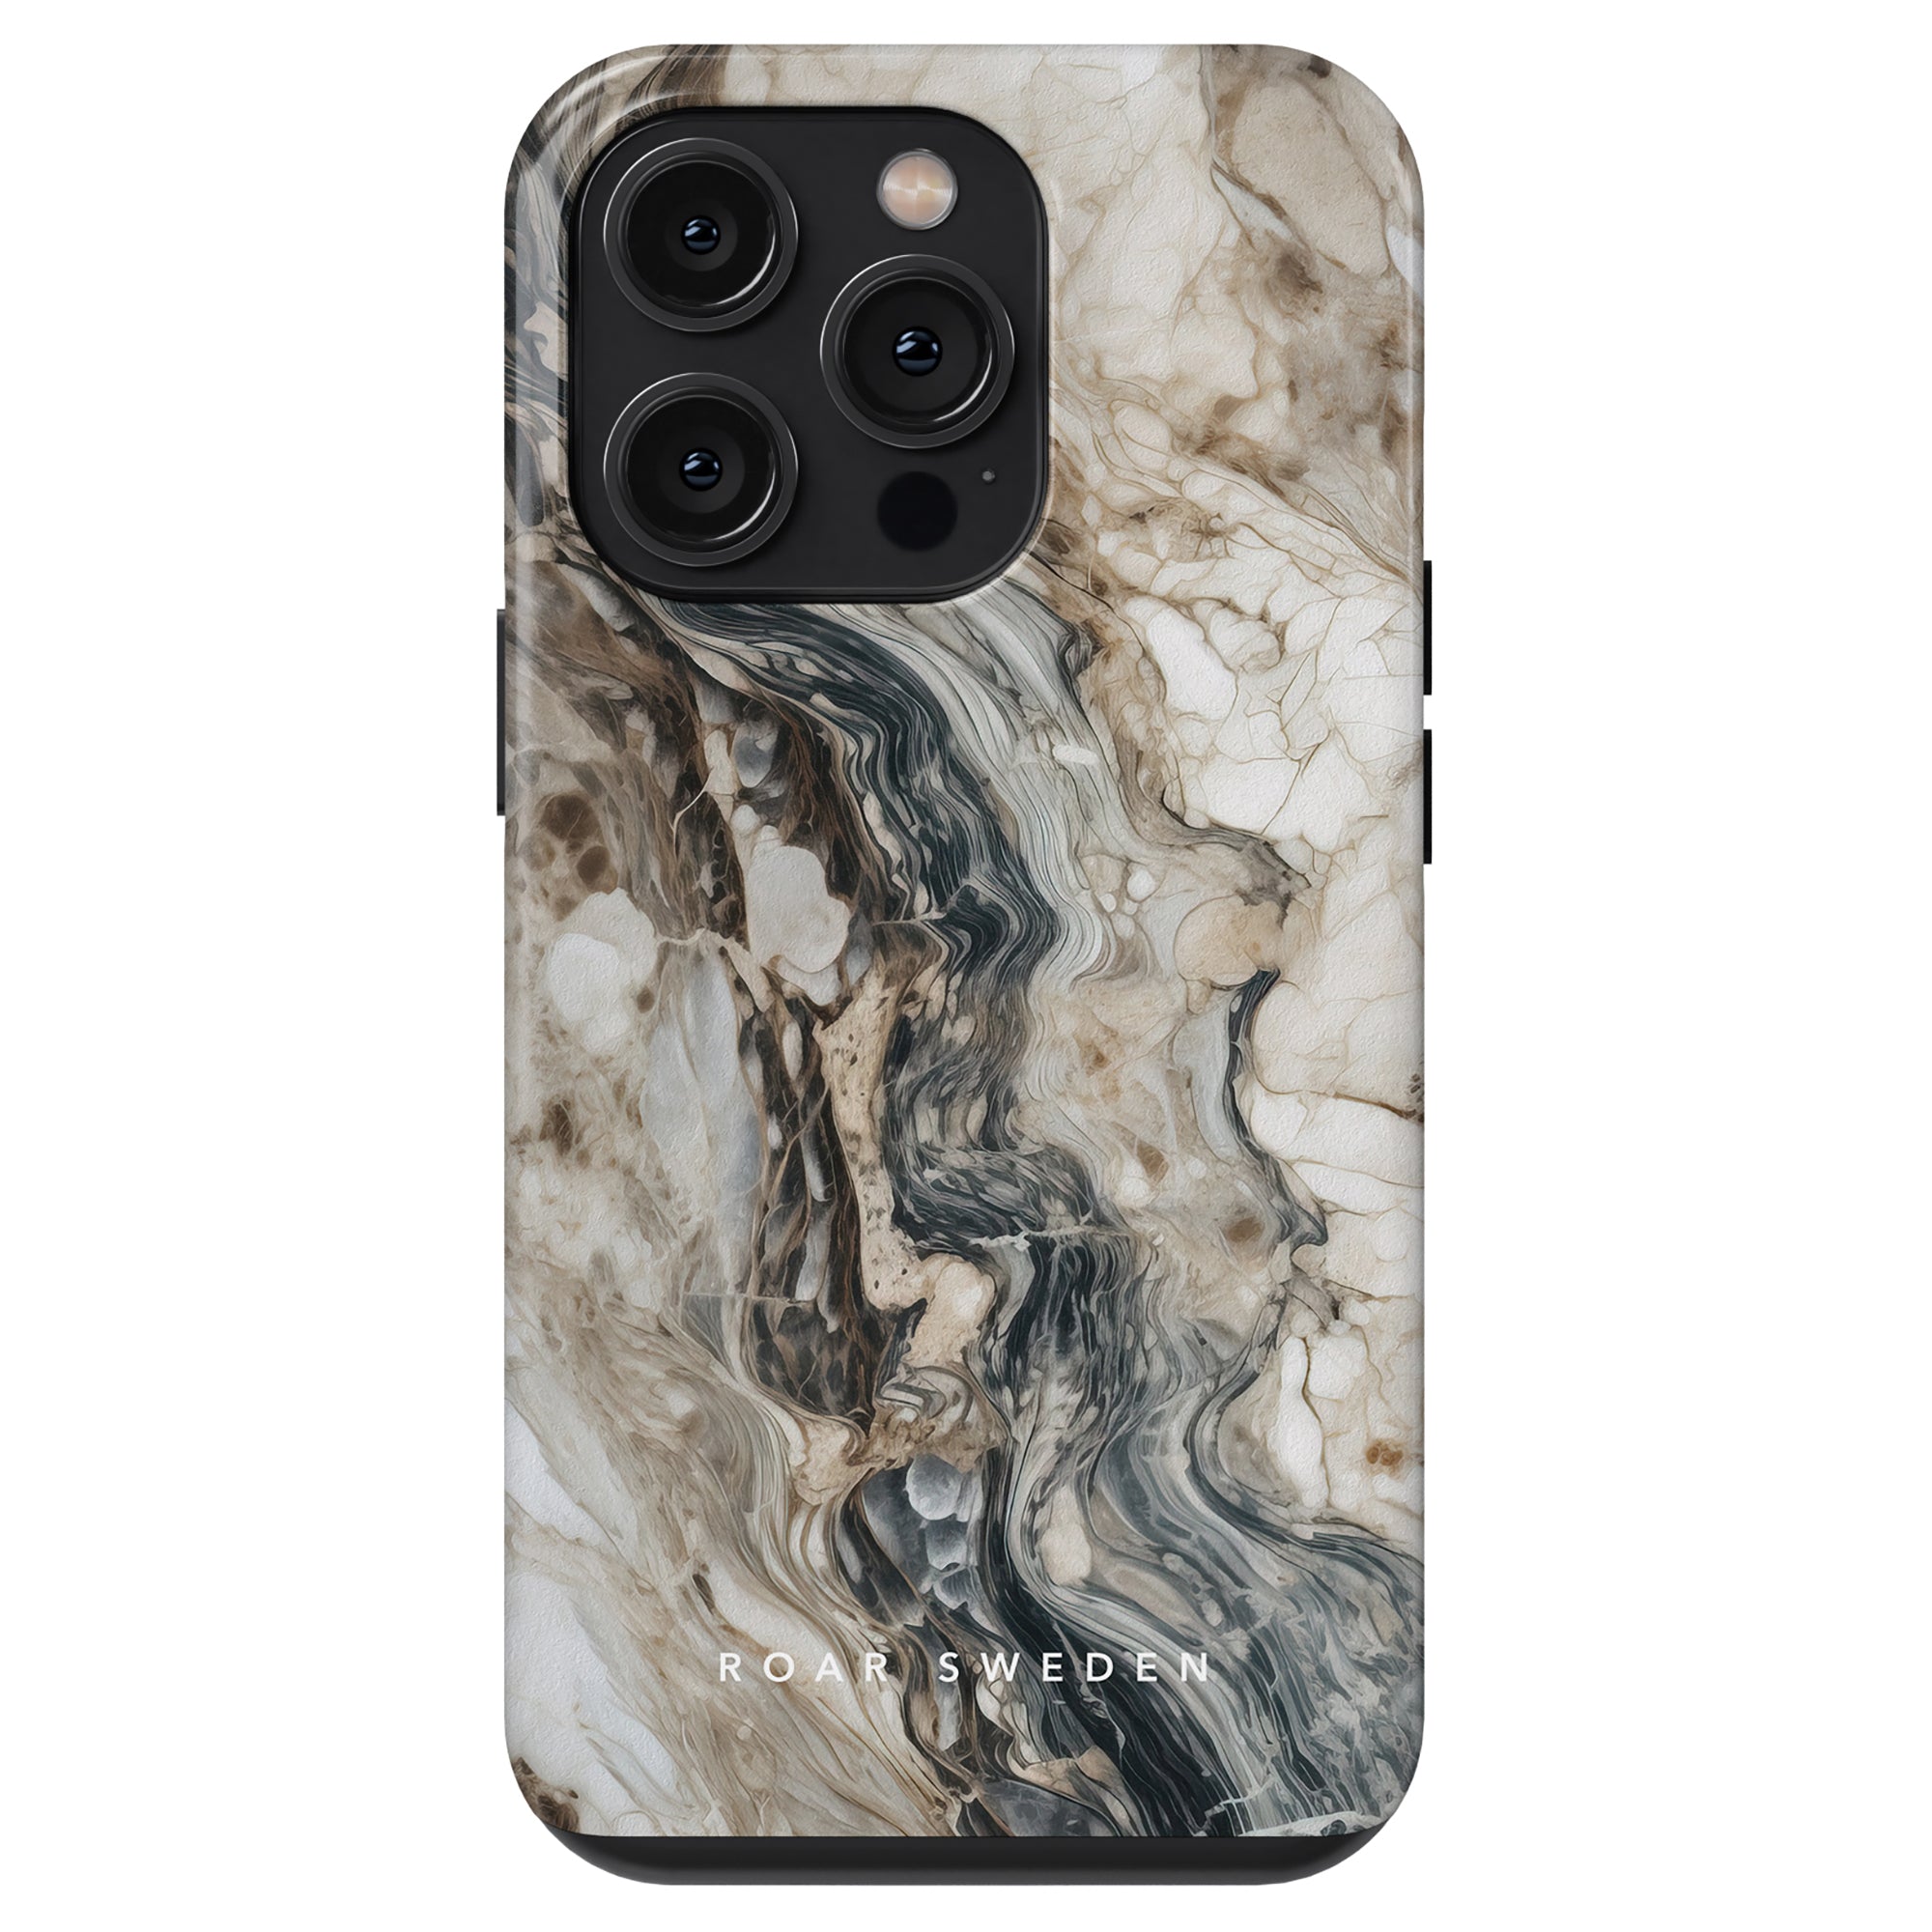 Smartphone with a marbled gray, white, and brown case from the Ocean-kollektion featuring a swirling pattern and the text "ROAR SWEDEN" near the bottom. Three camera lenses are visible on the back, offering robust skydd. Napoleon - Tough Case